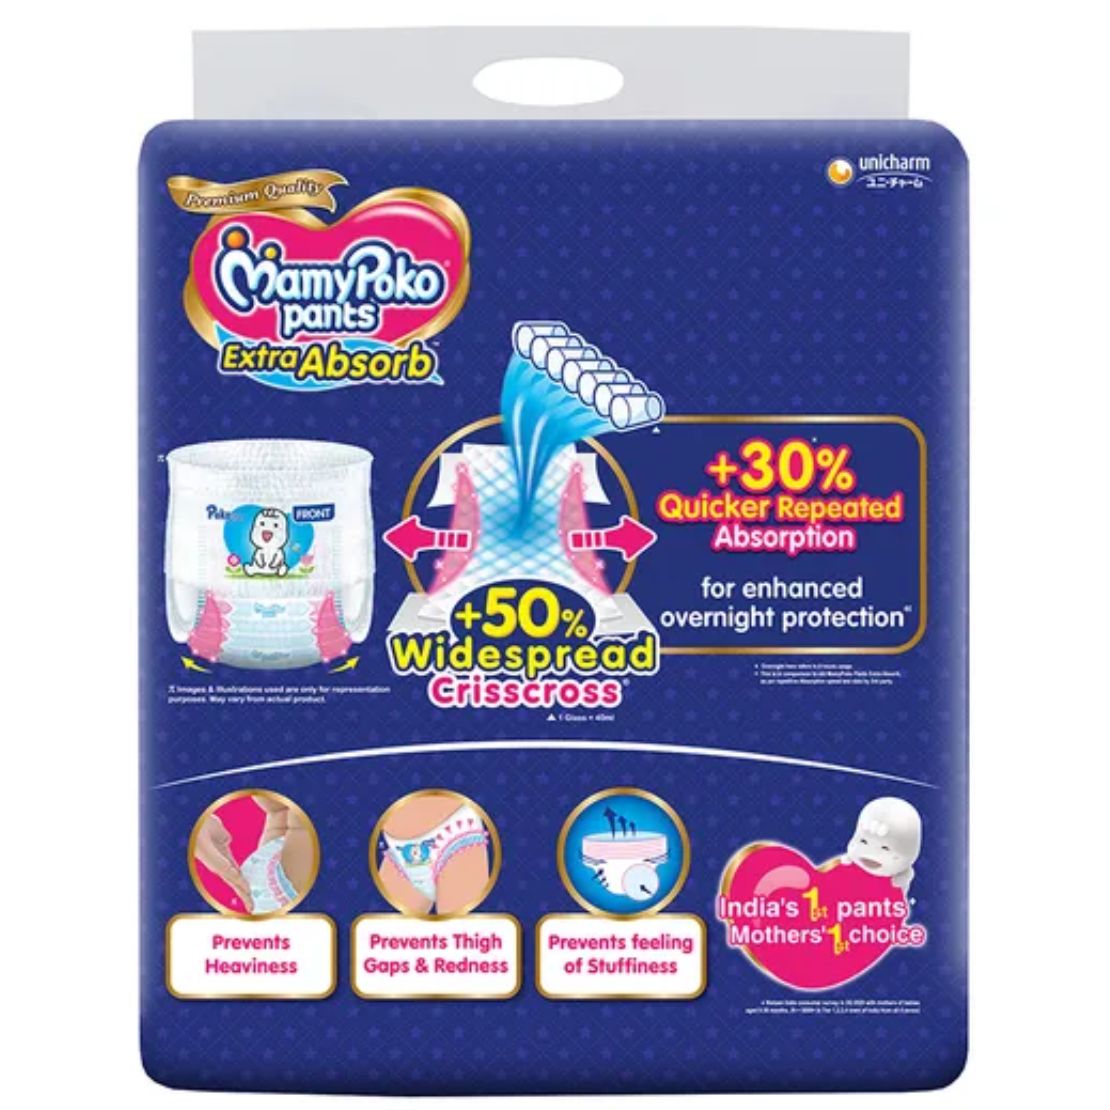 MamyPoko Pants Extra Absorb Diaper for Unisex Baby, Small (Pack of 78) :  Amazon.in: Baby Products